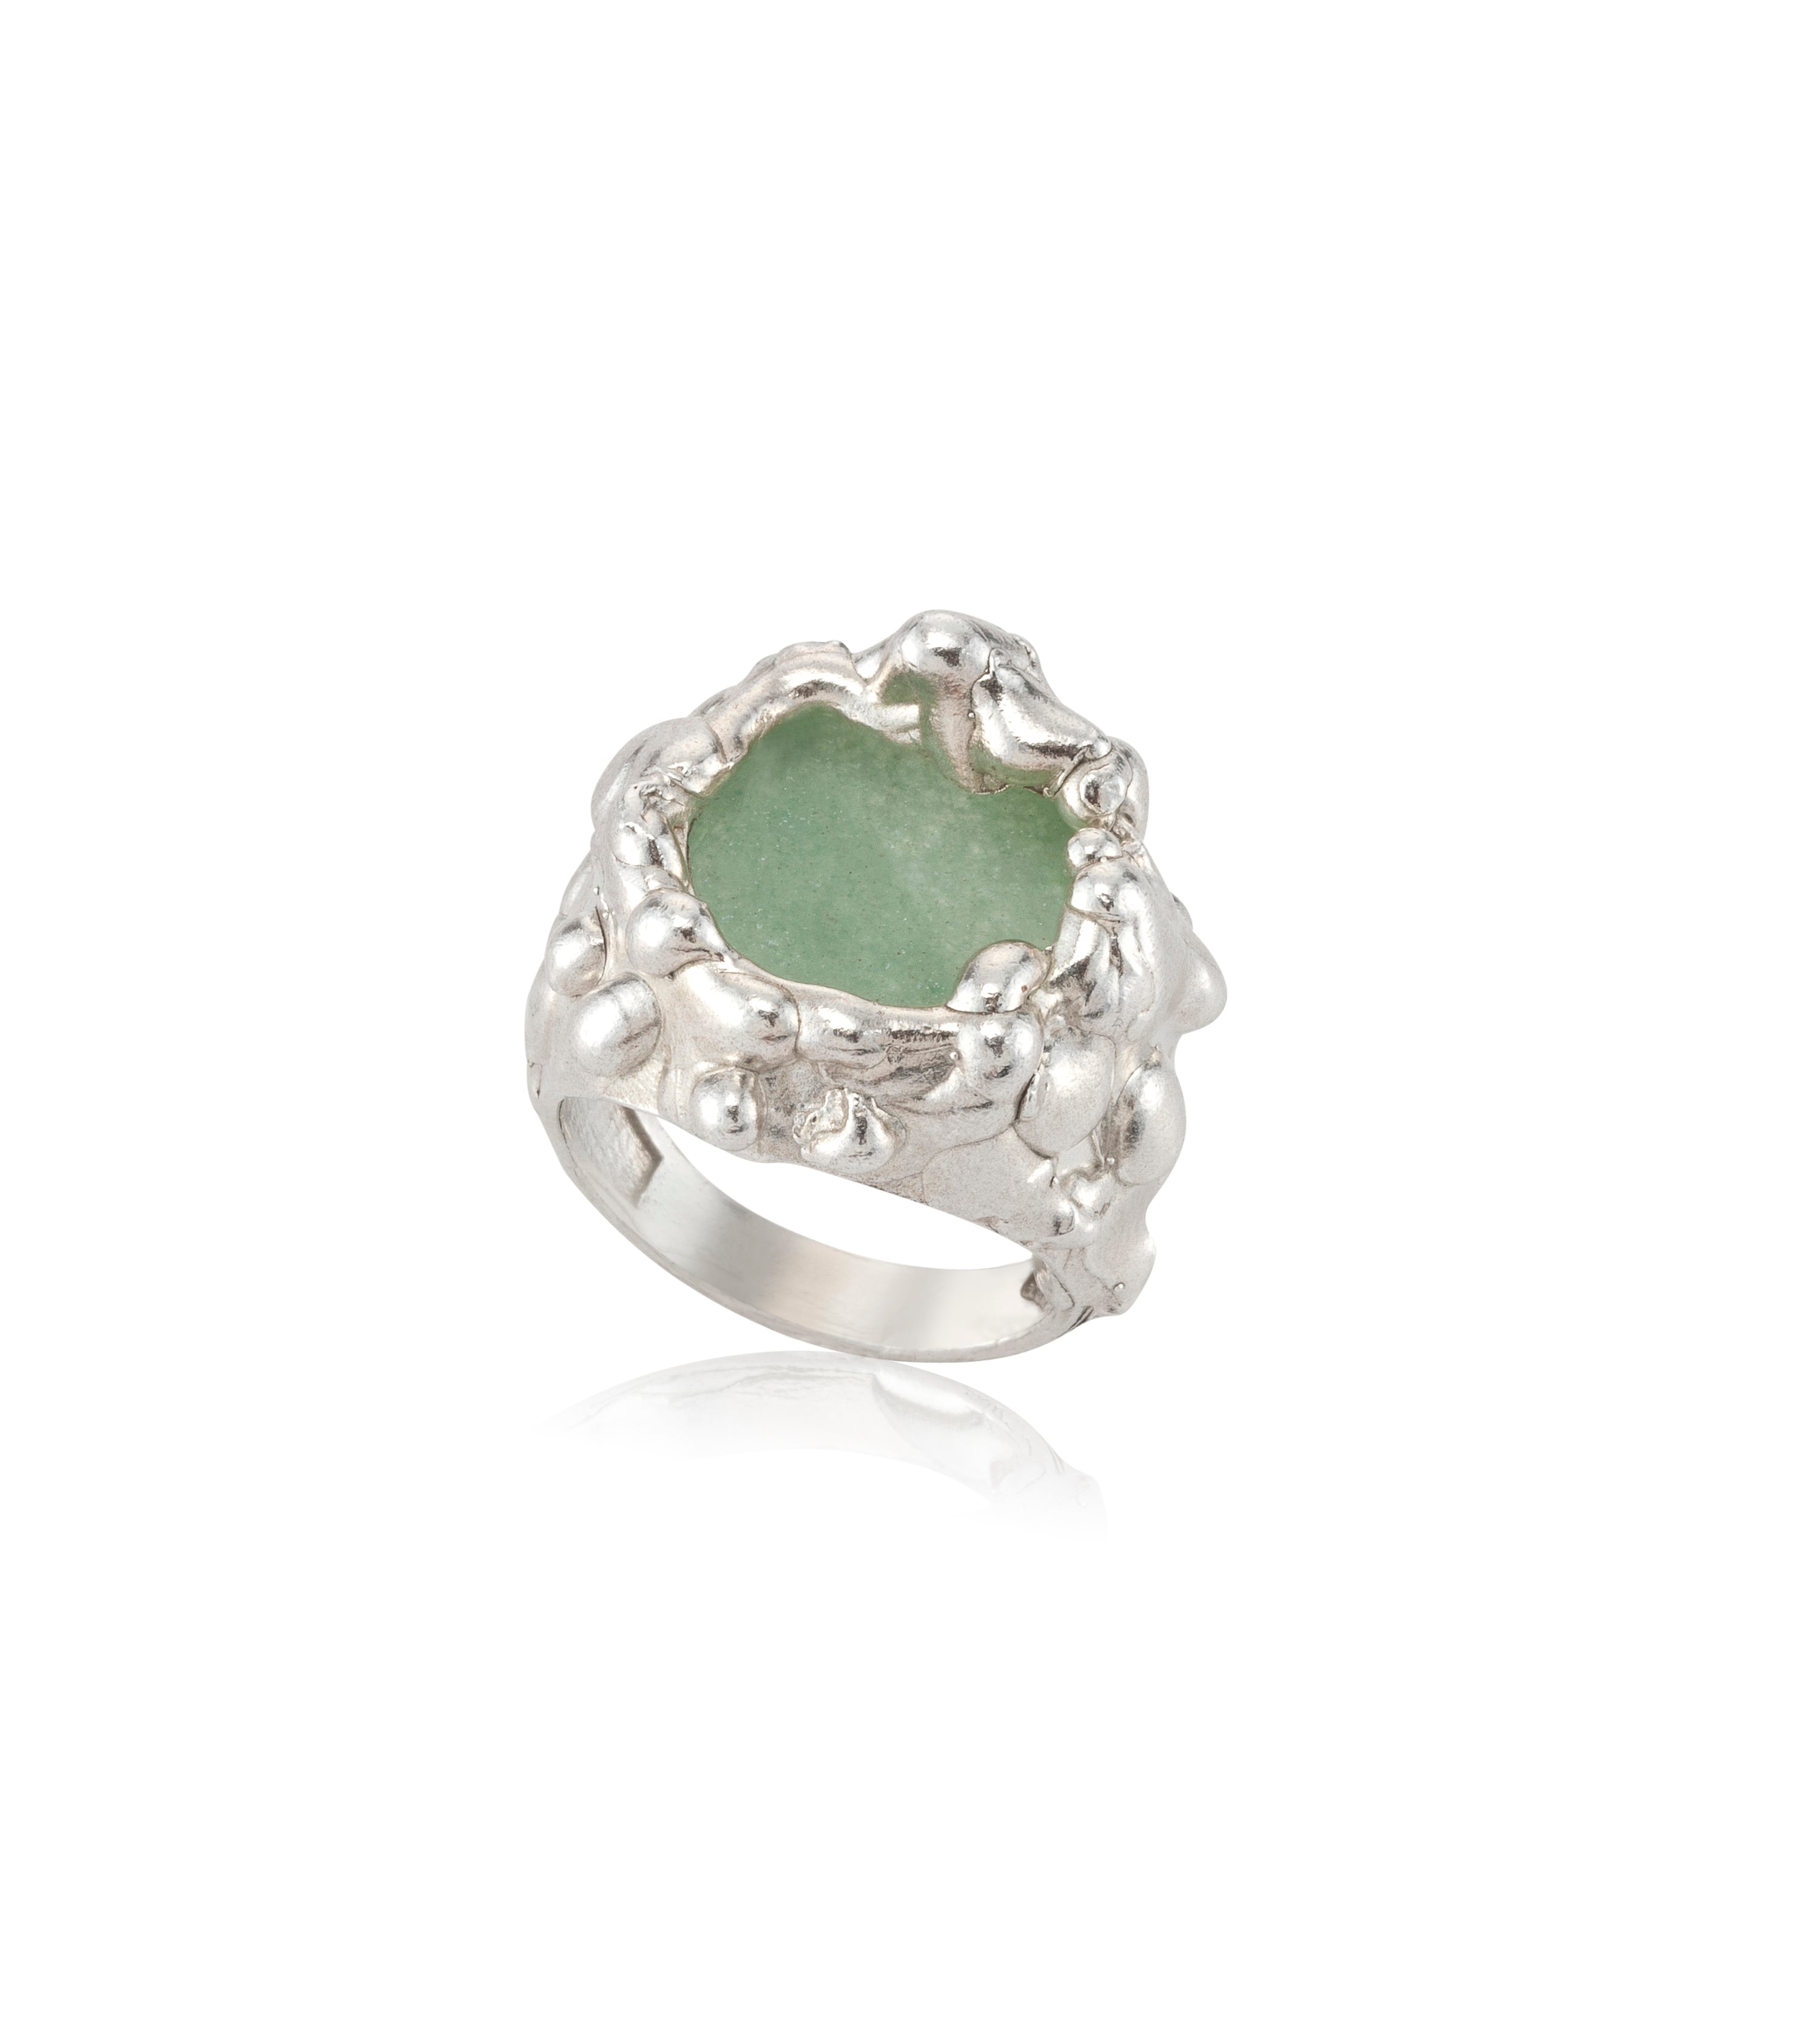 dripping signet ring with a light green aventurine